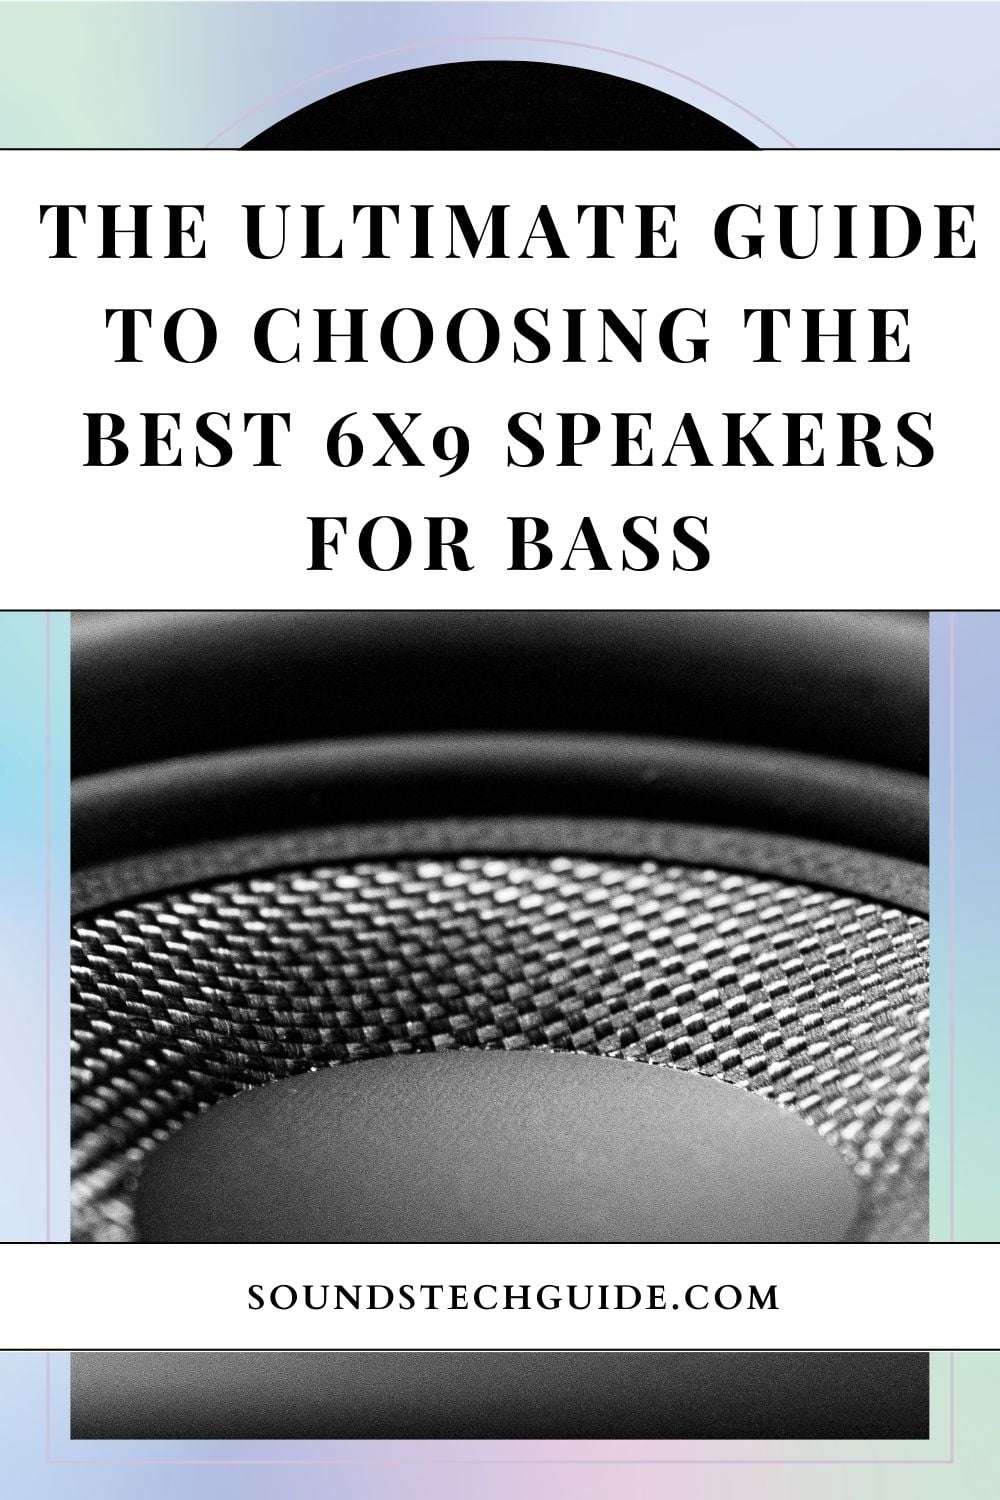 Best 6x9 Speakers for Bass